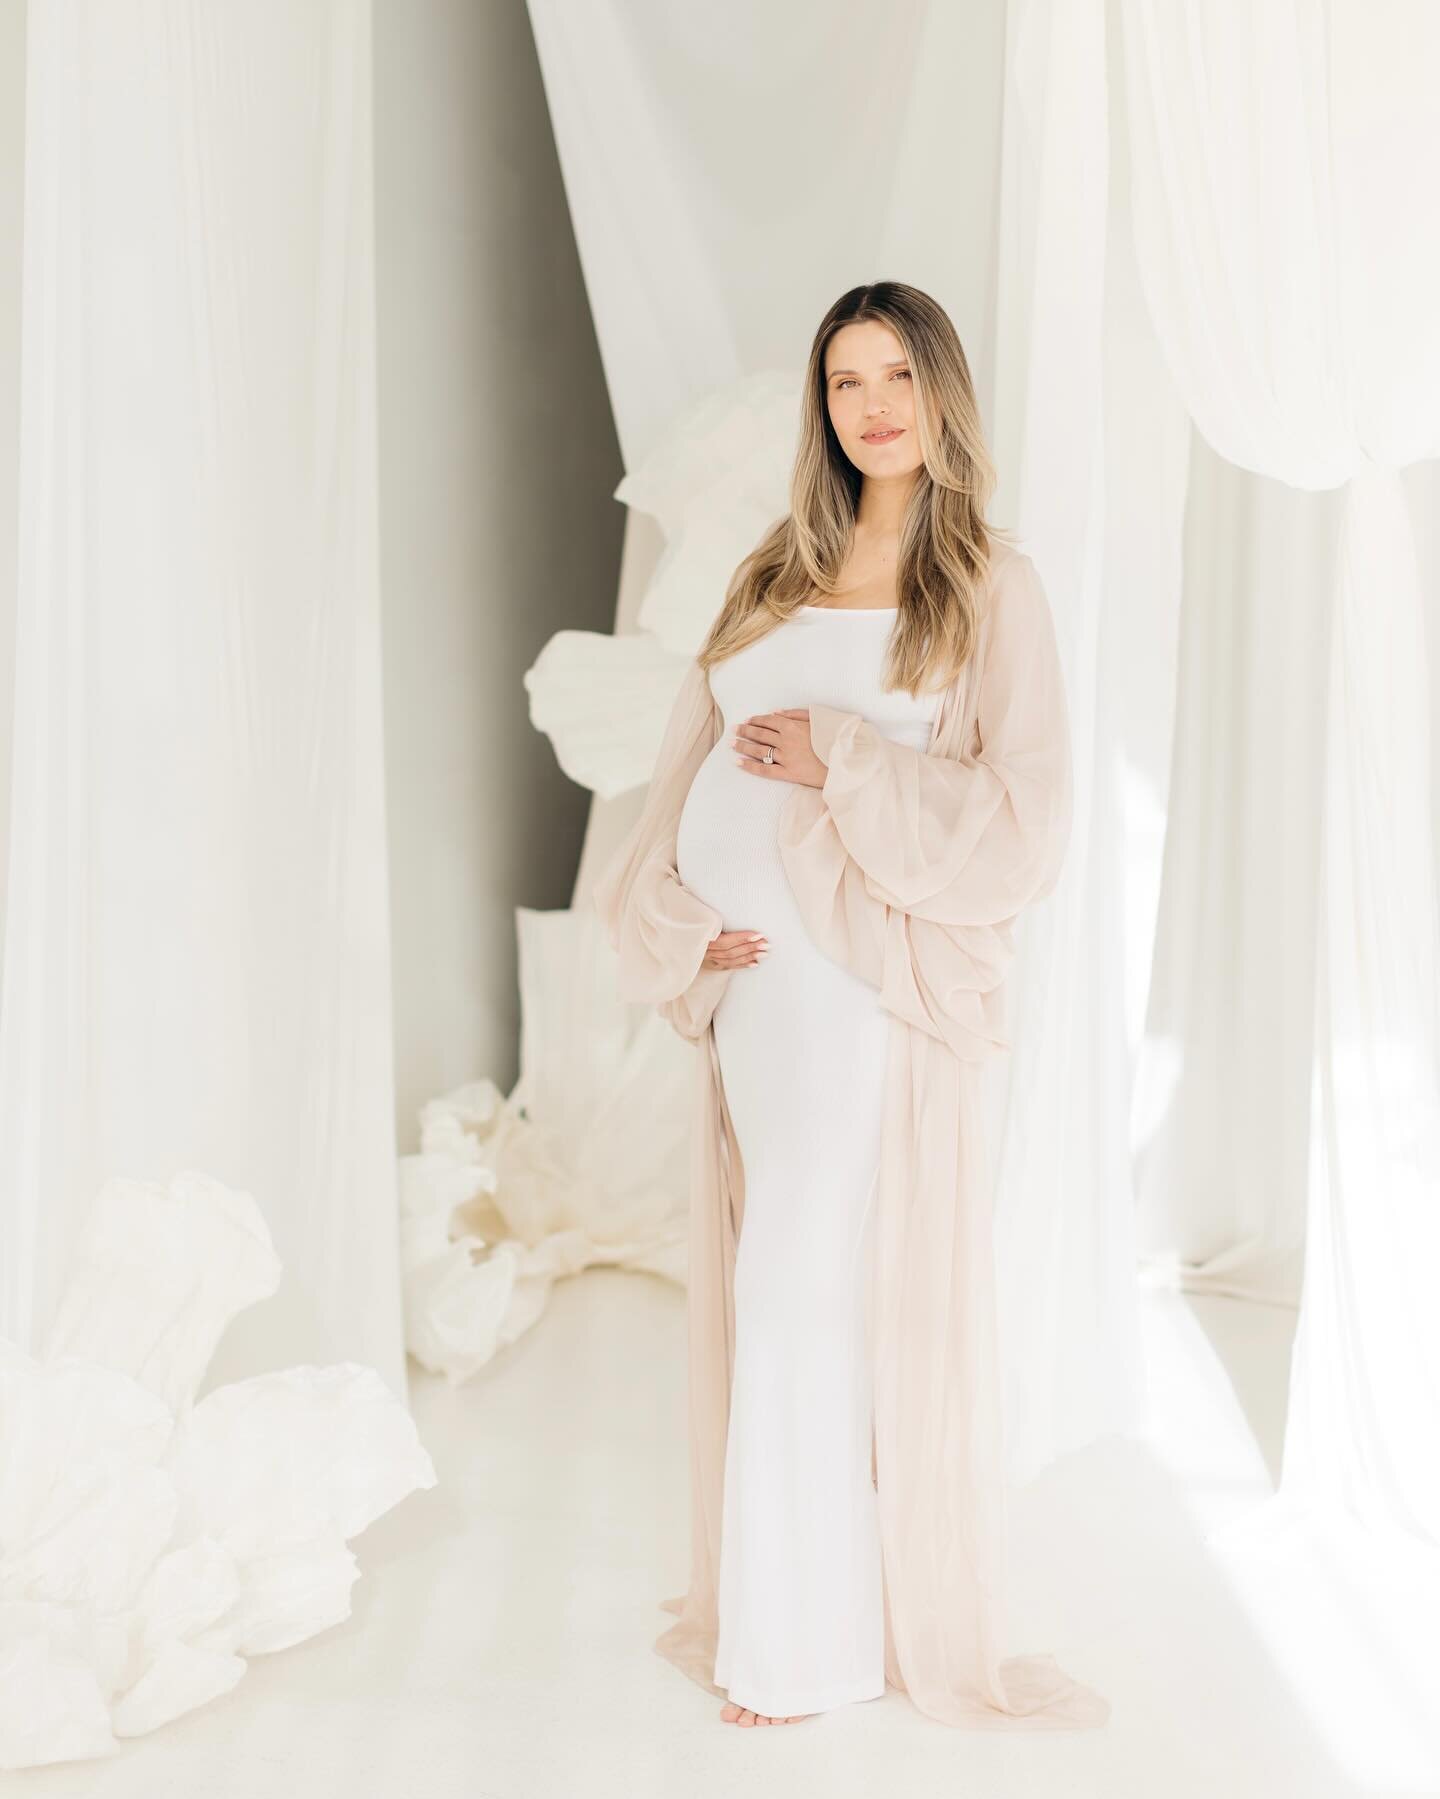 We&rsquo;ve been doing a string of maternity sessions lately and we are here for it! ❤️ The Solarium&rsquo;s winter setup provided the most romantic backdrop for Anna &amp; Alex&rsquo;s session. 💫⁣⁣
⁣⁣
We have ONE slot left for this room on March 9,